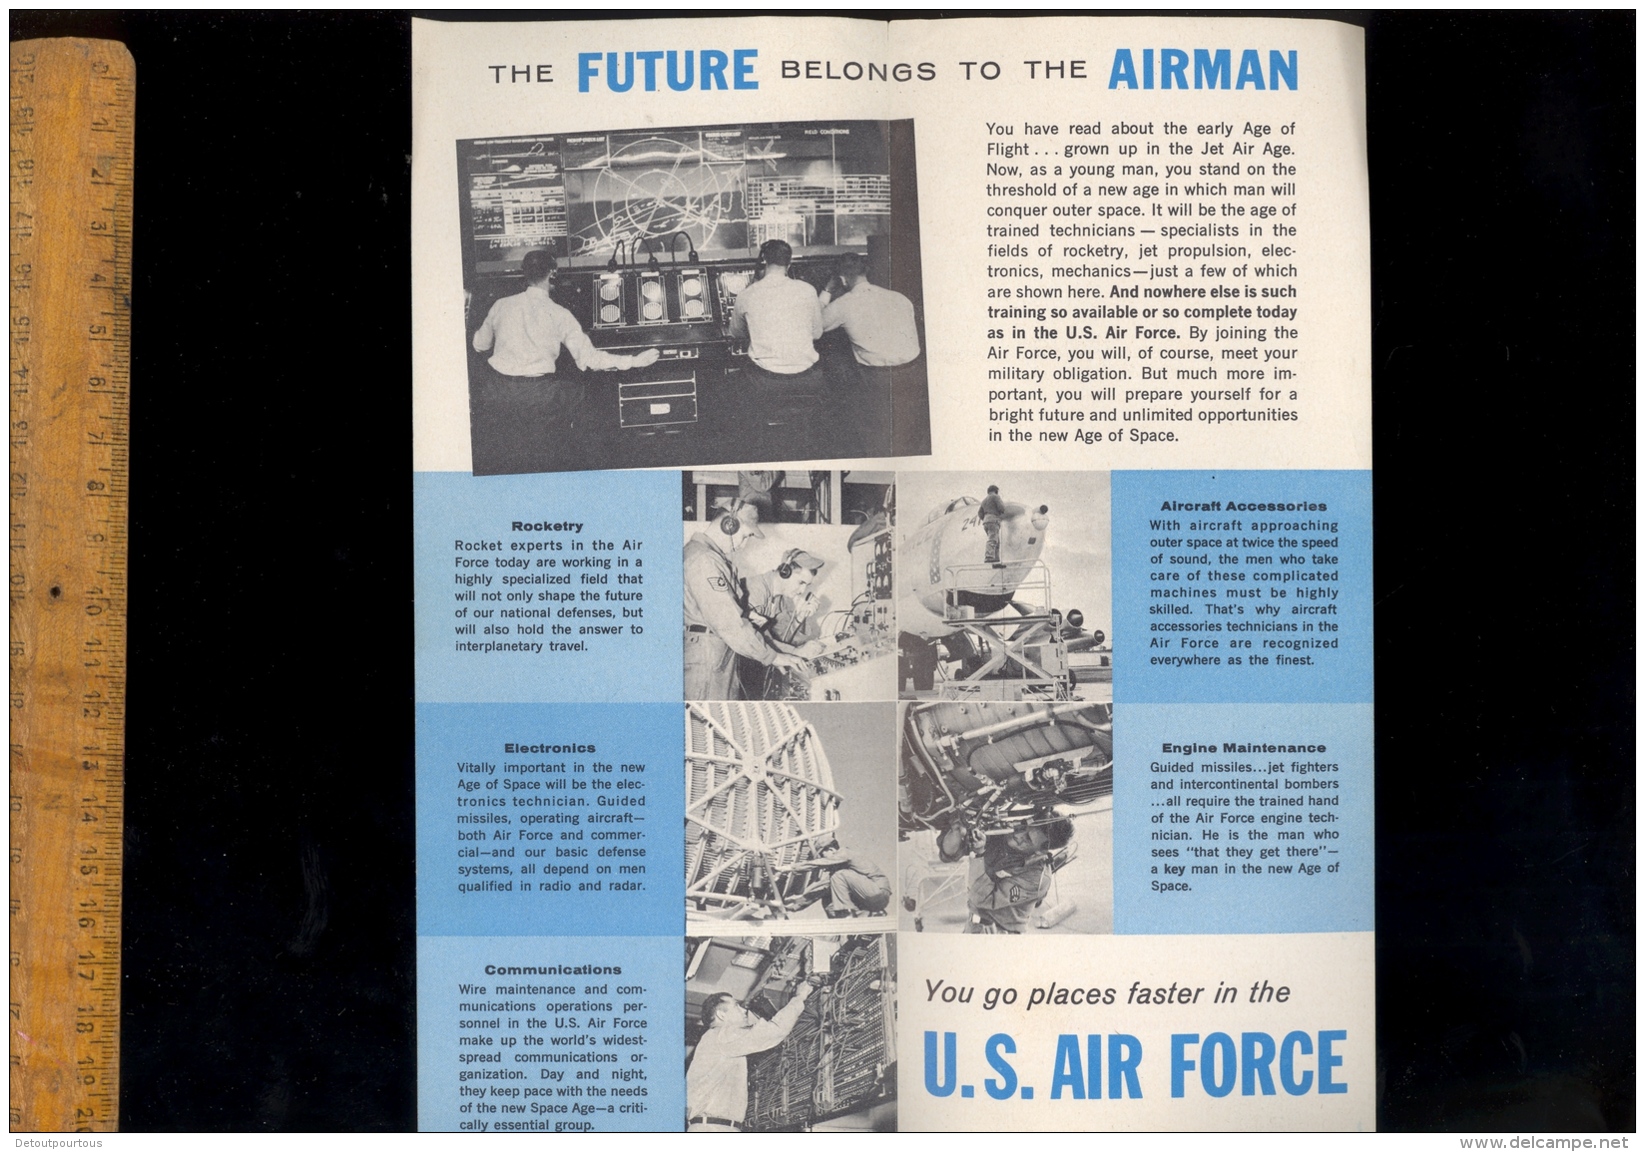 USAF US AIR FORCE Recruiting Opportunities For You In The New Age Of Space - Verenigde Staten